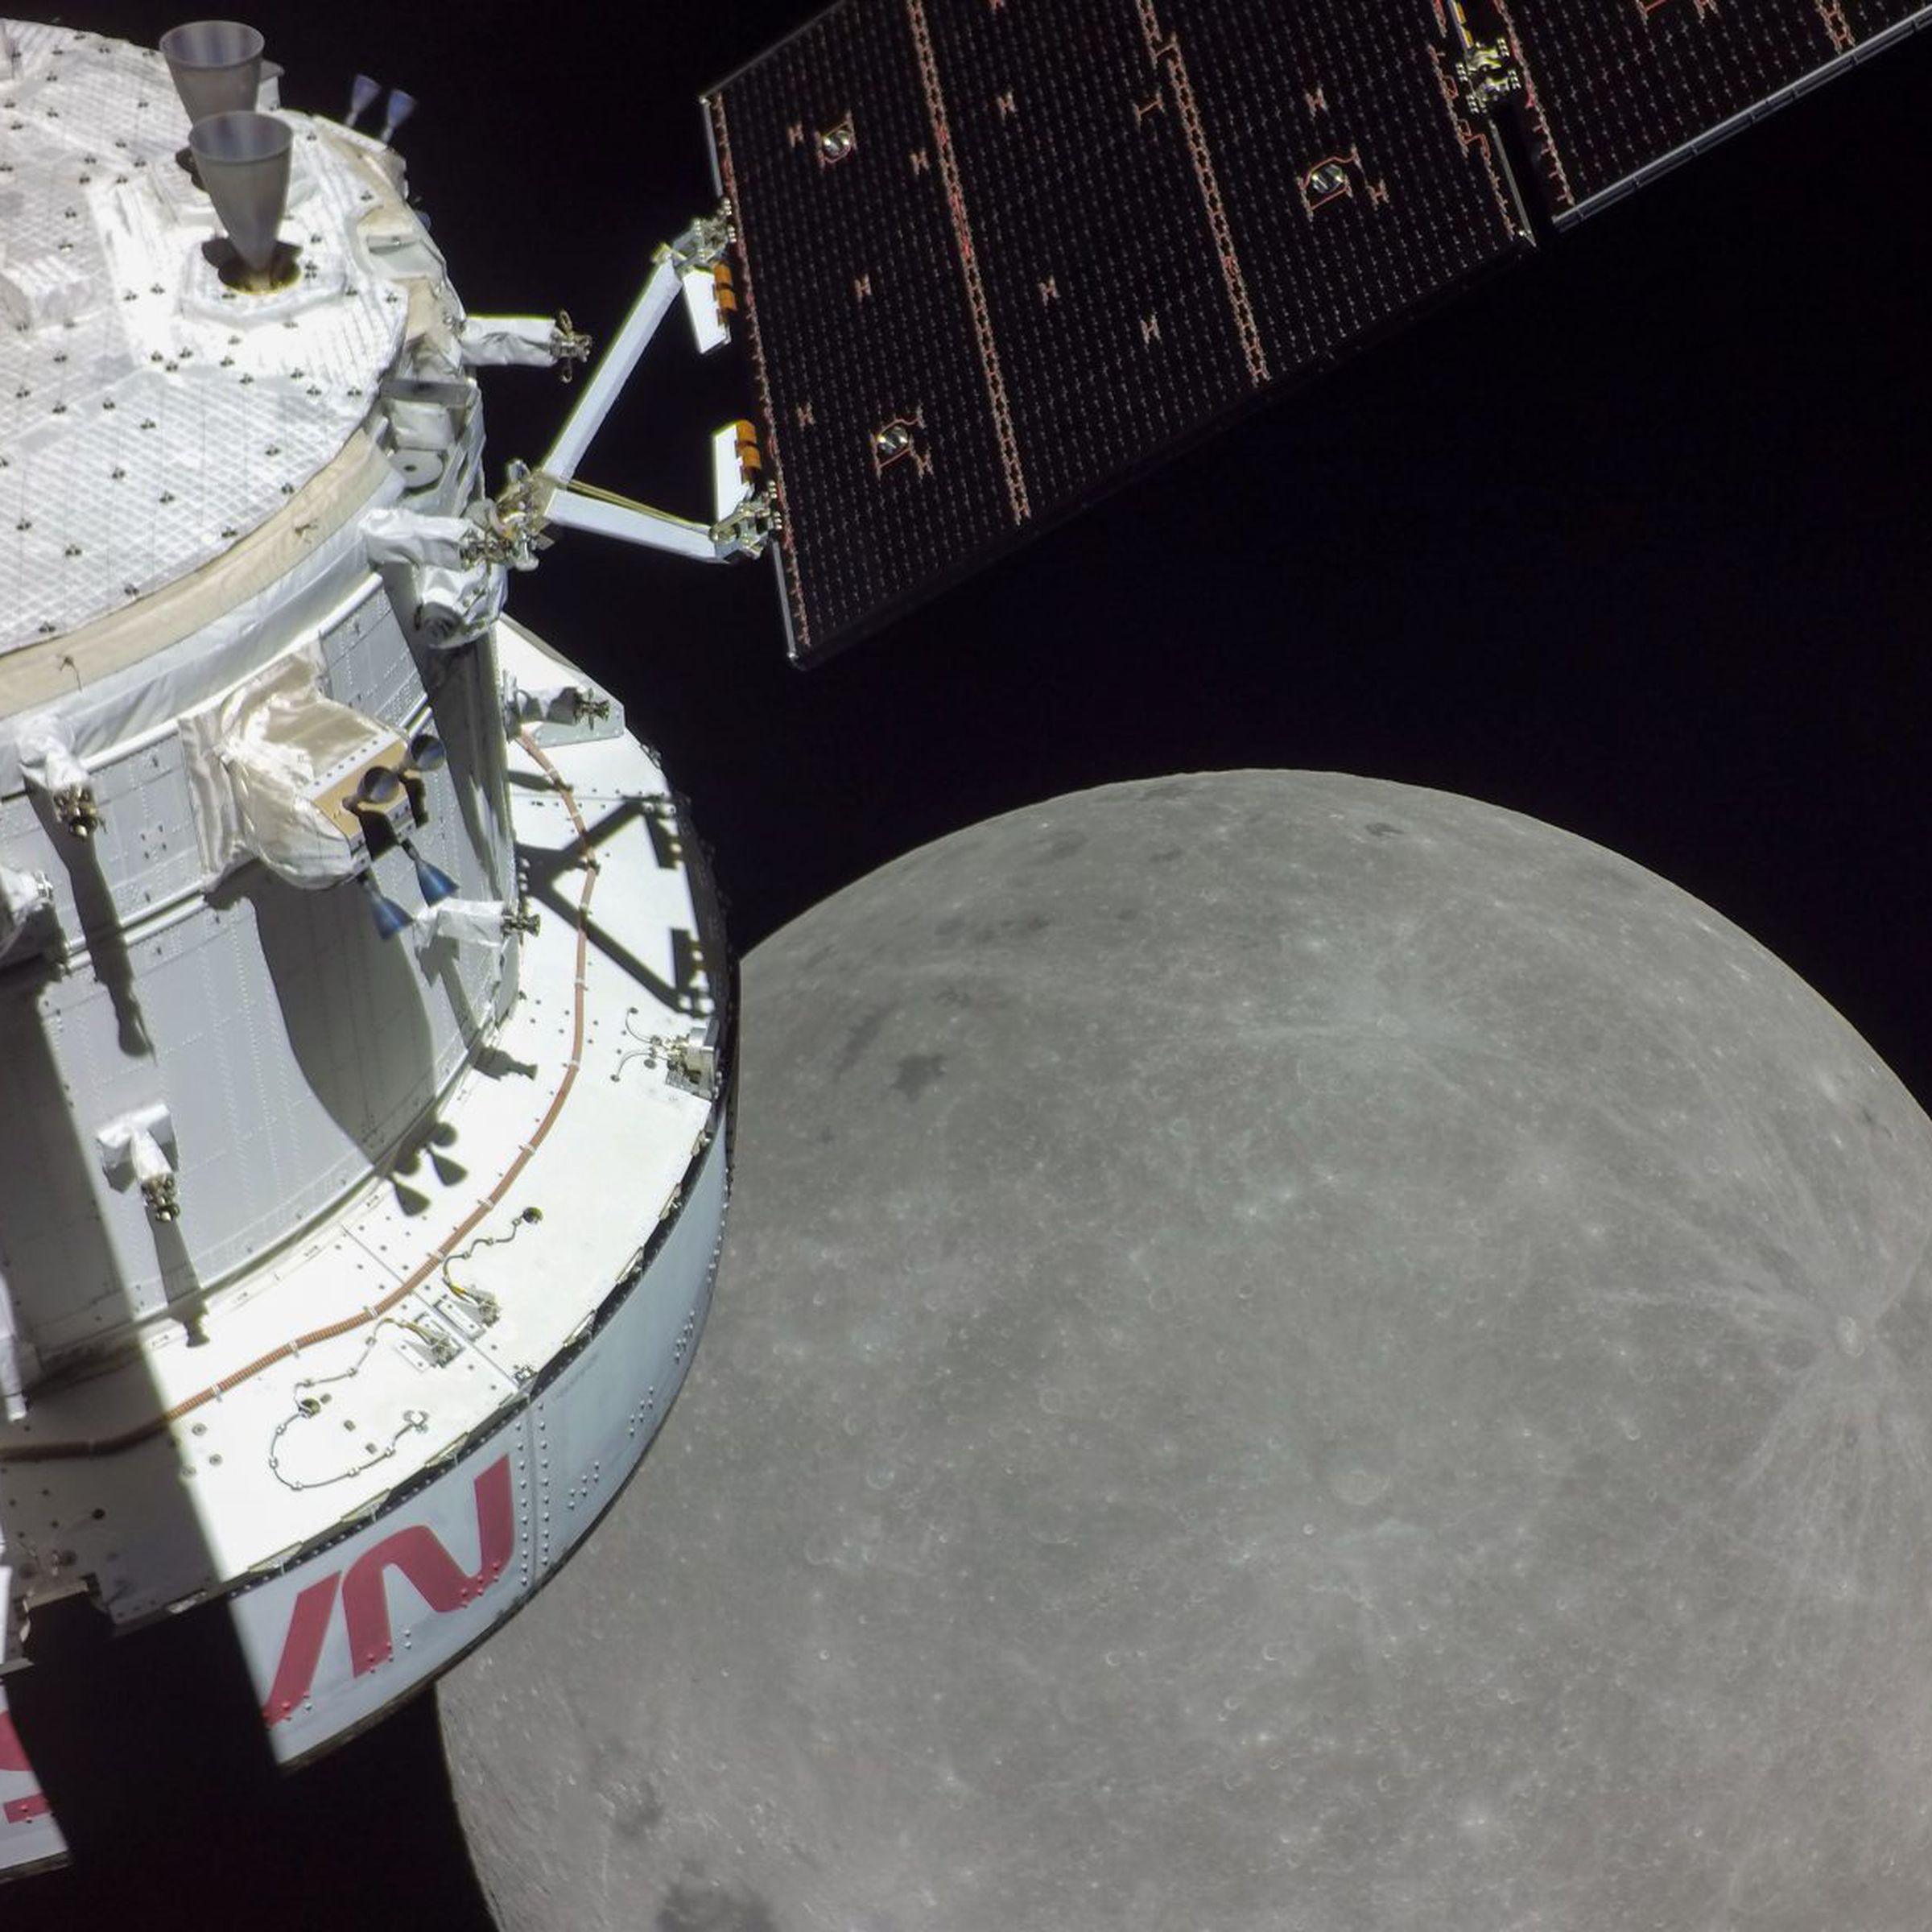 A white spacecraft with NASA’s logo in red is on the left with the disc of the moon in the center.